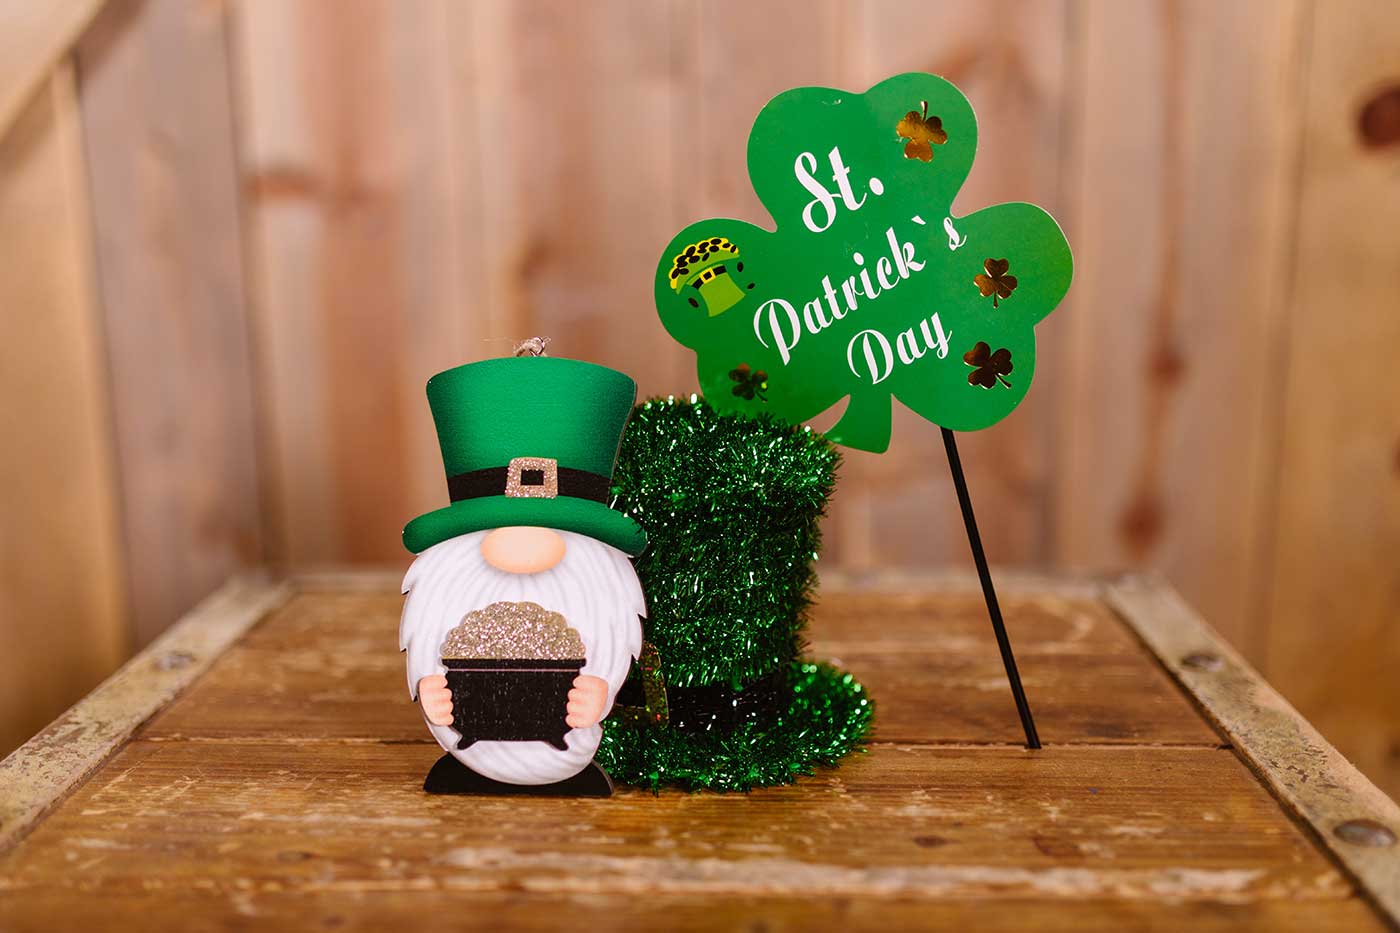  St. Patrick’s Day for The Elderly